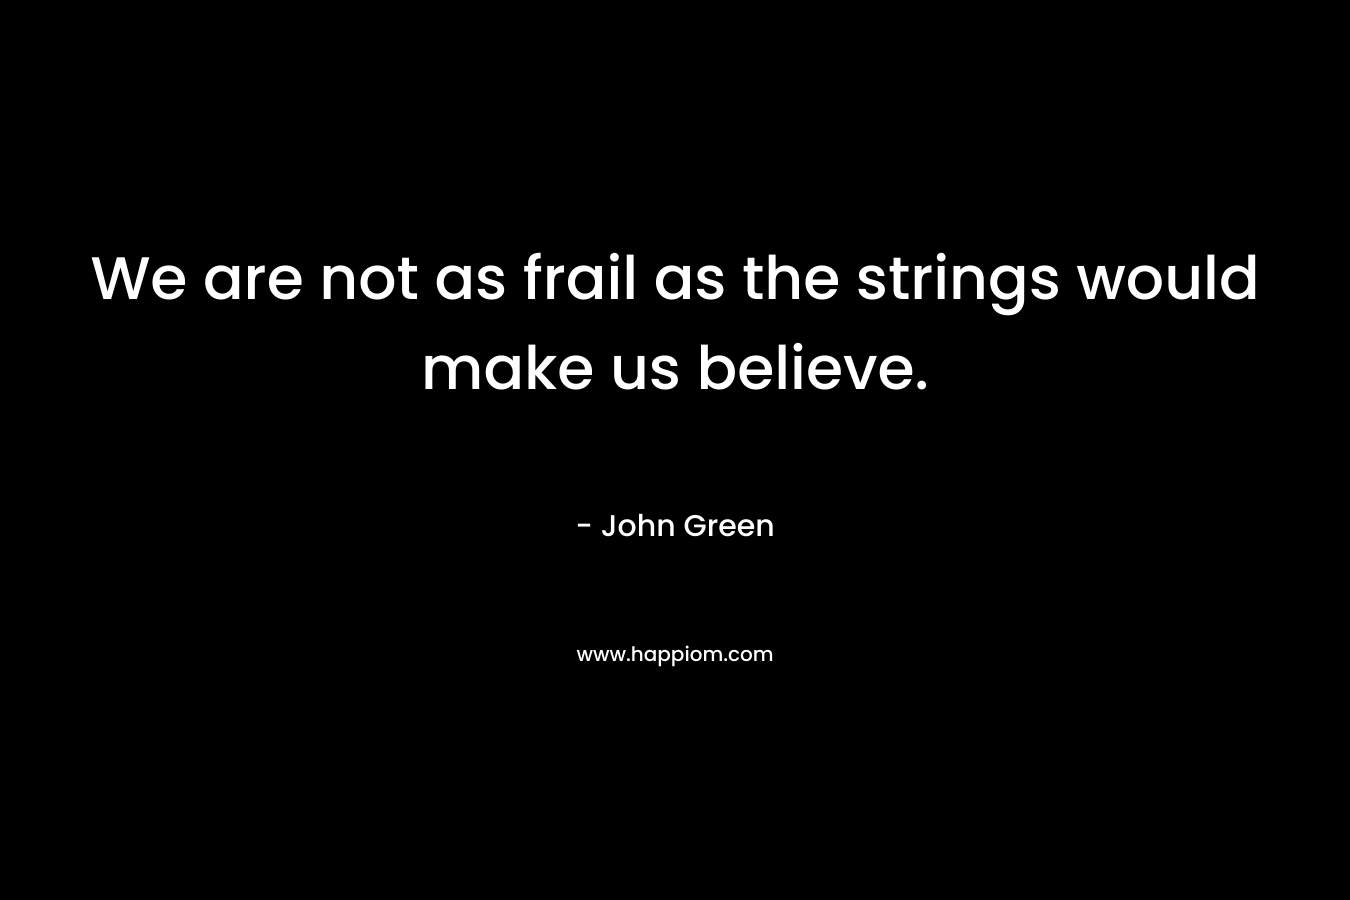 We are not as frail as the strings would make us believe. – John Green